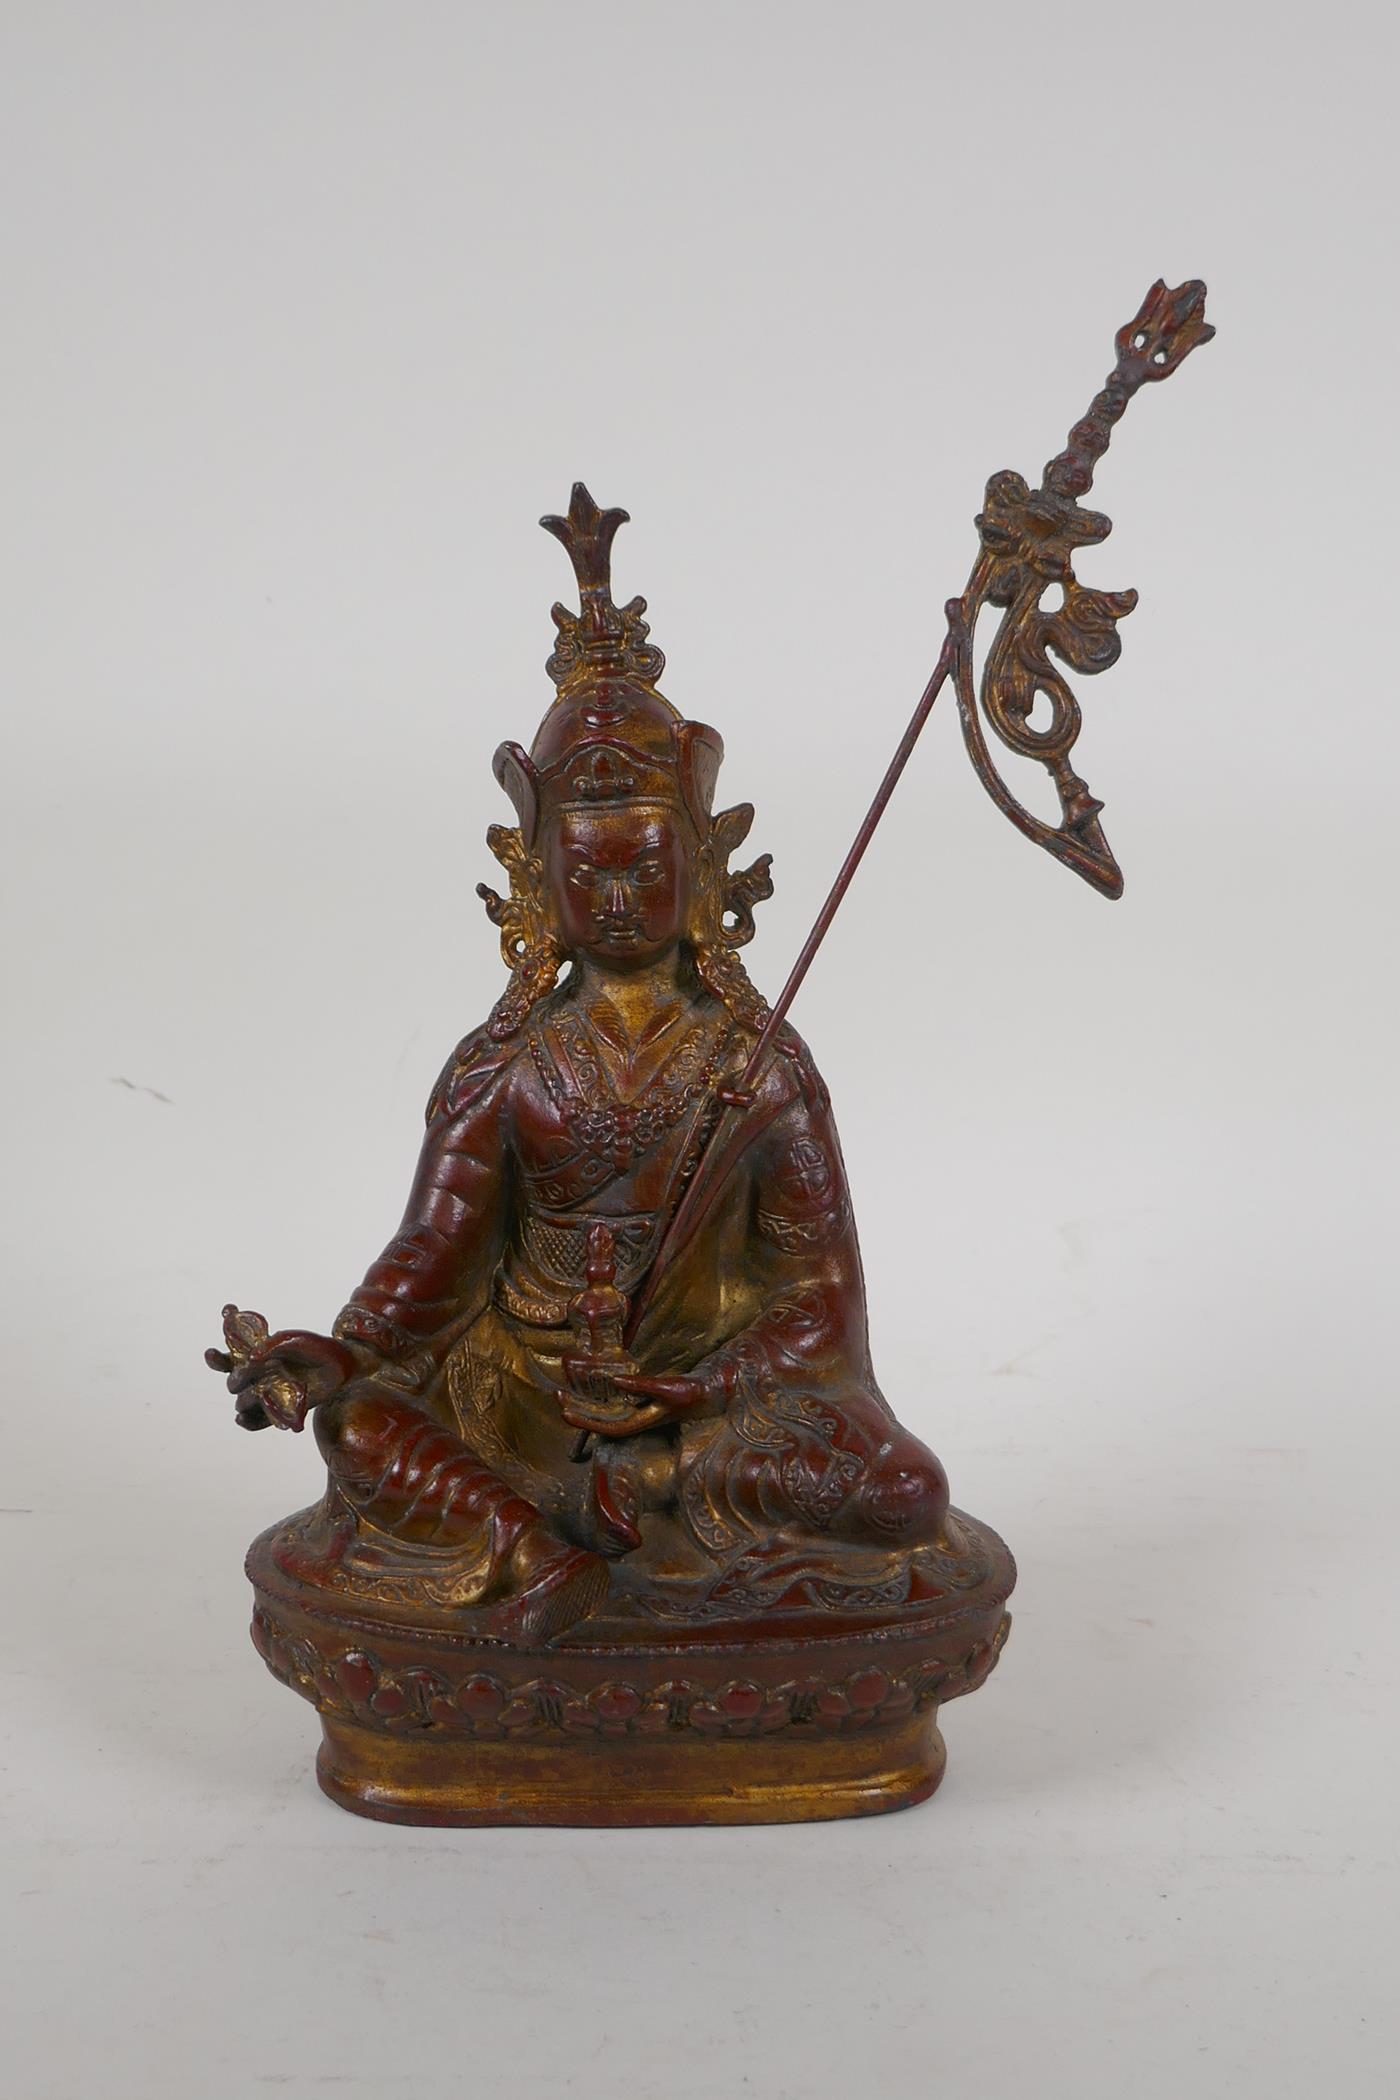 A Sino Tibetan gilt and coppered bronze figure of Buddha seated and holding a vajra, 10½" high